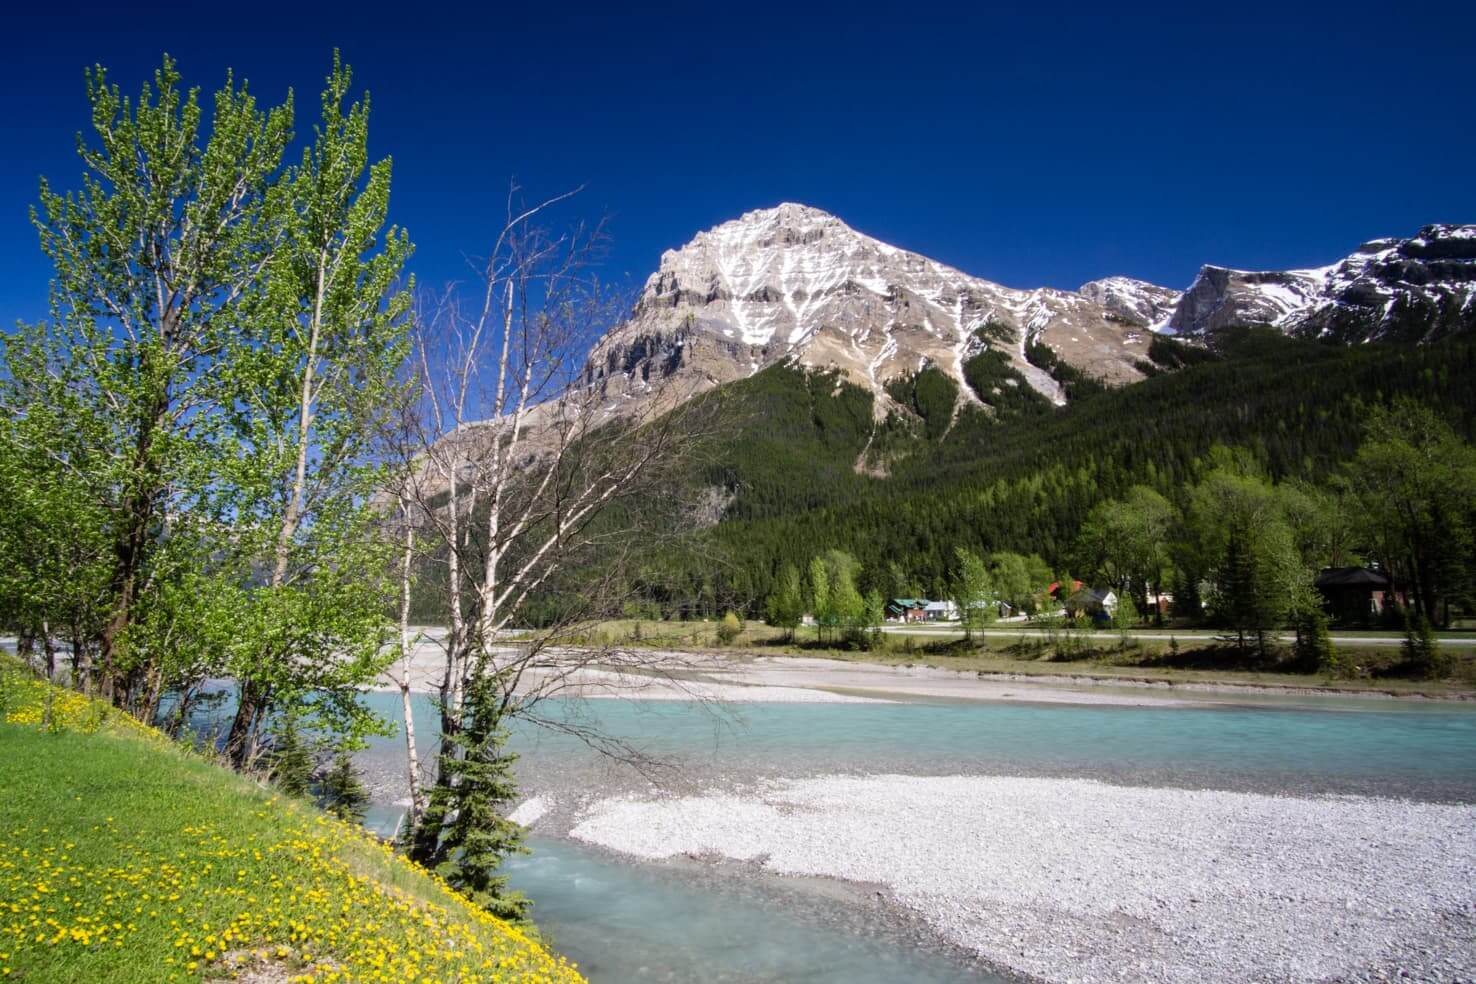 100 best things to do in Banff National Park, Canada - Visit Yoho National Park and its capital Field